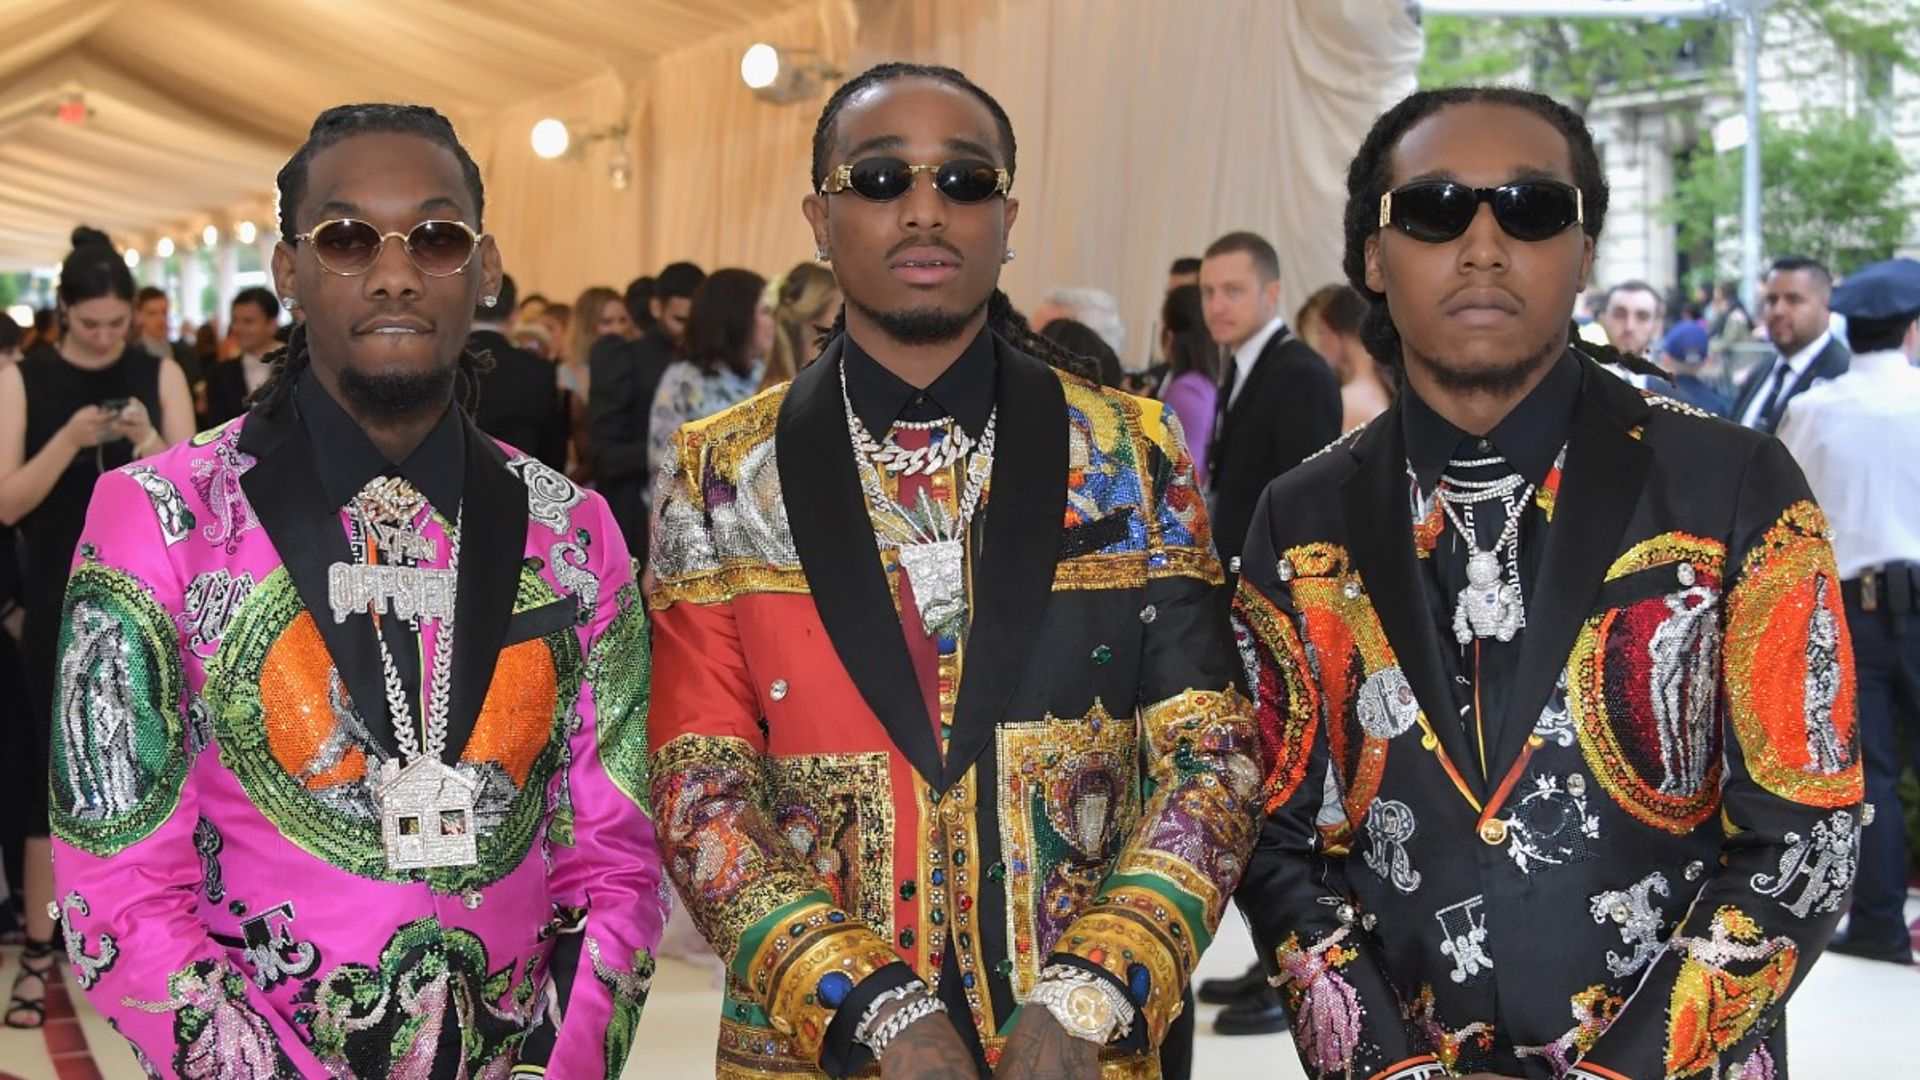 Migos Rapper Takeoff Dead At 28 After Houston Shooting Stars React Hello